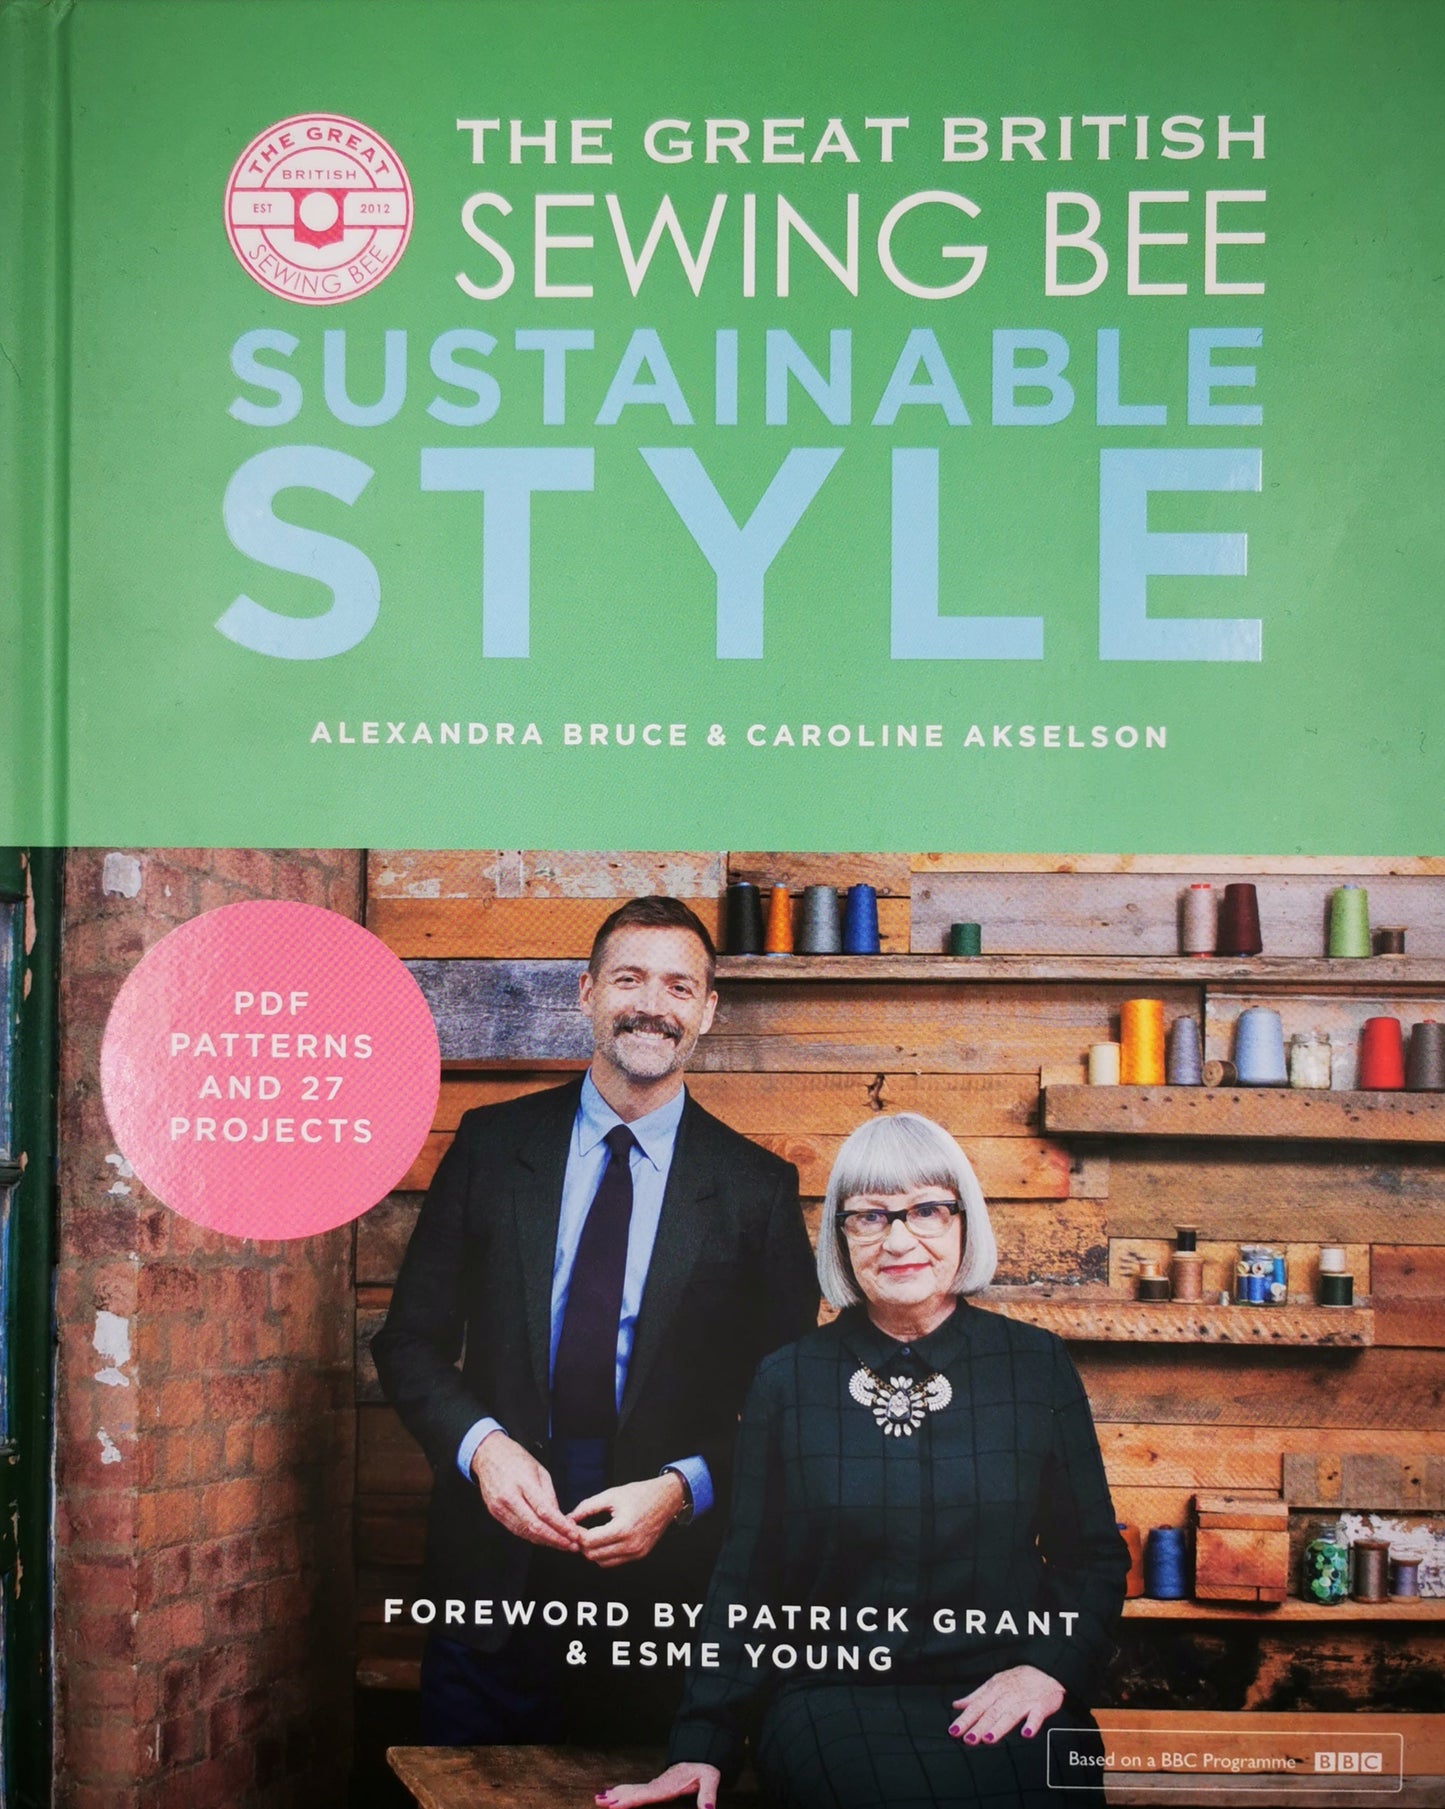 Great British Sewing Bee: Sustainable Style